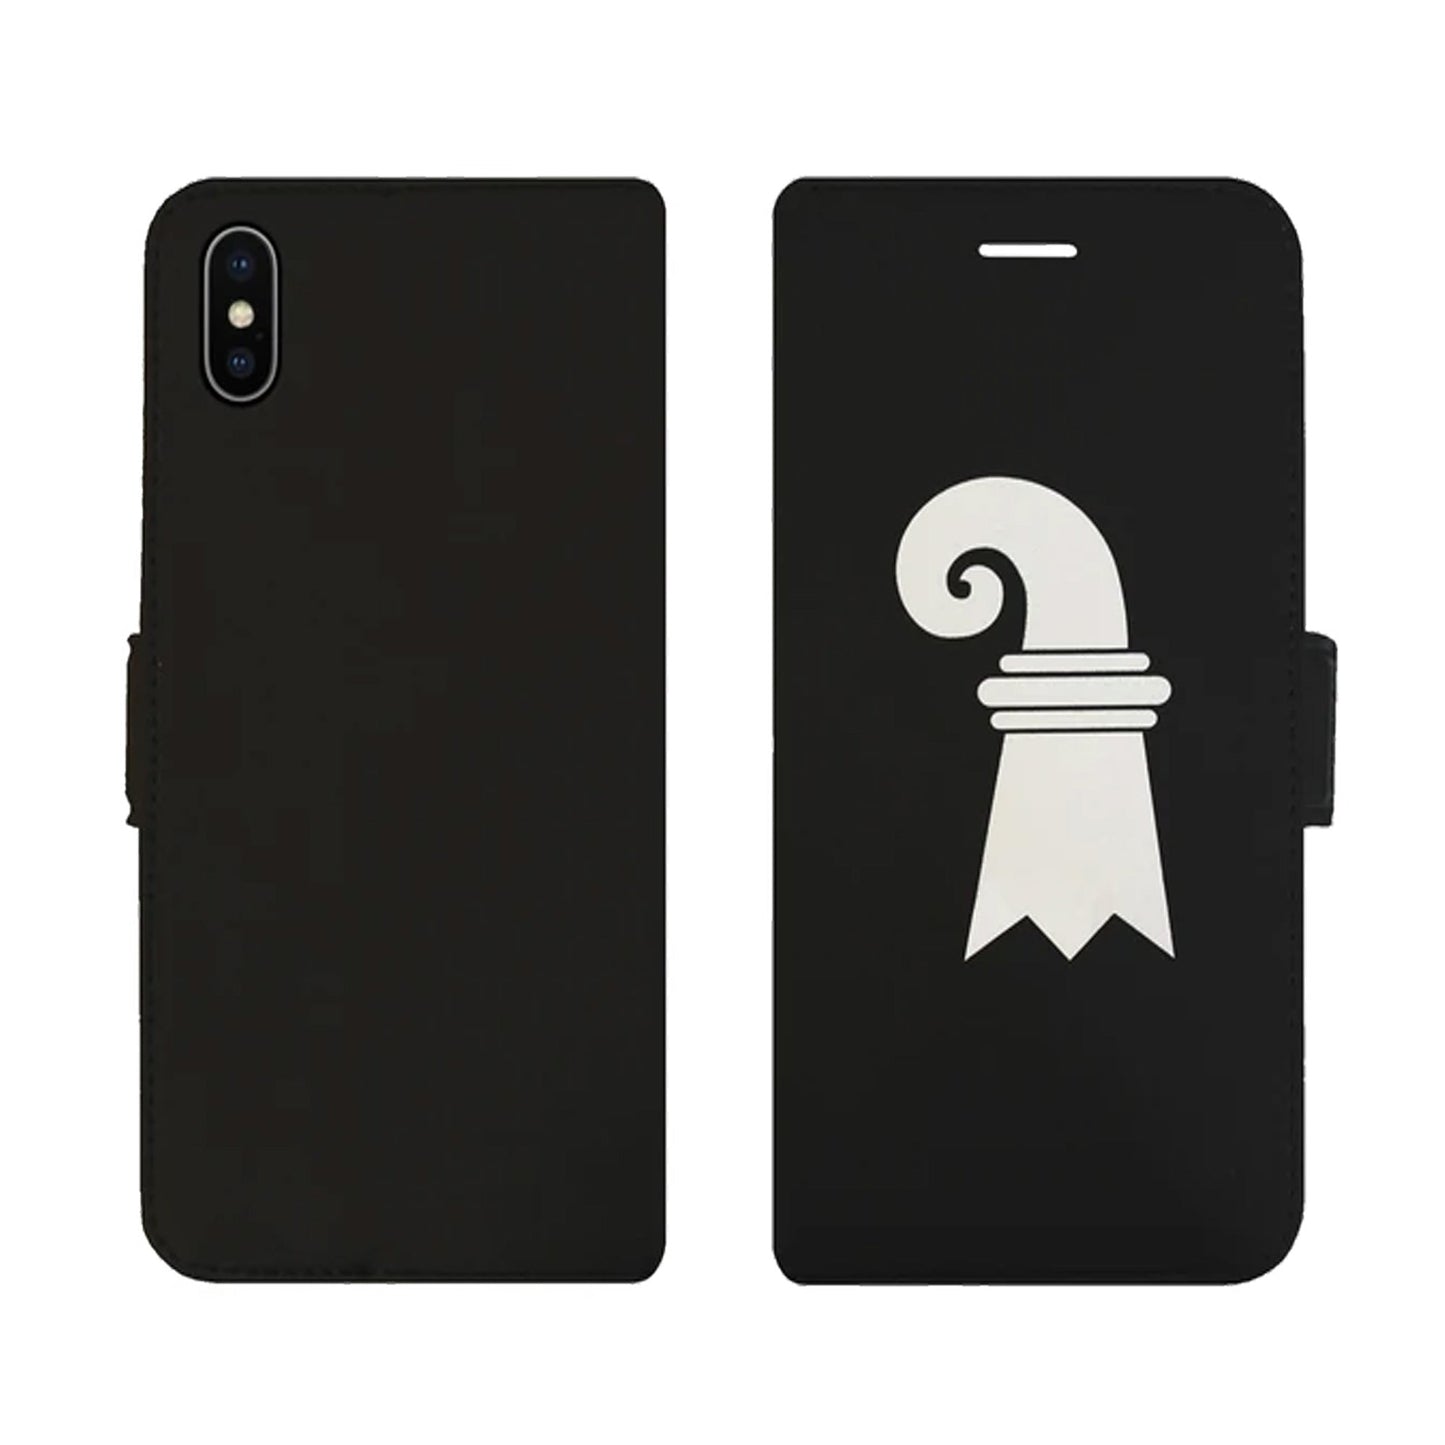 Baslerstab Negative Victor Case for iPhone X/XS